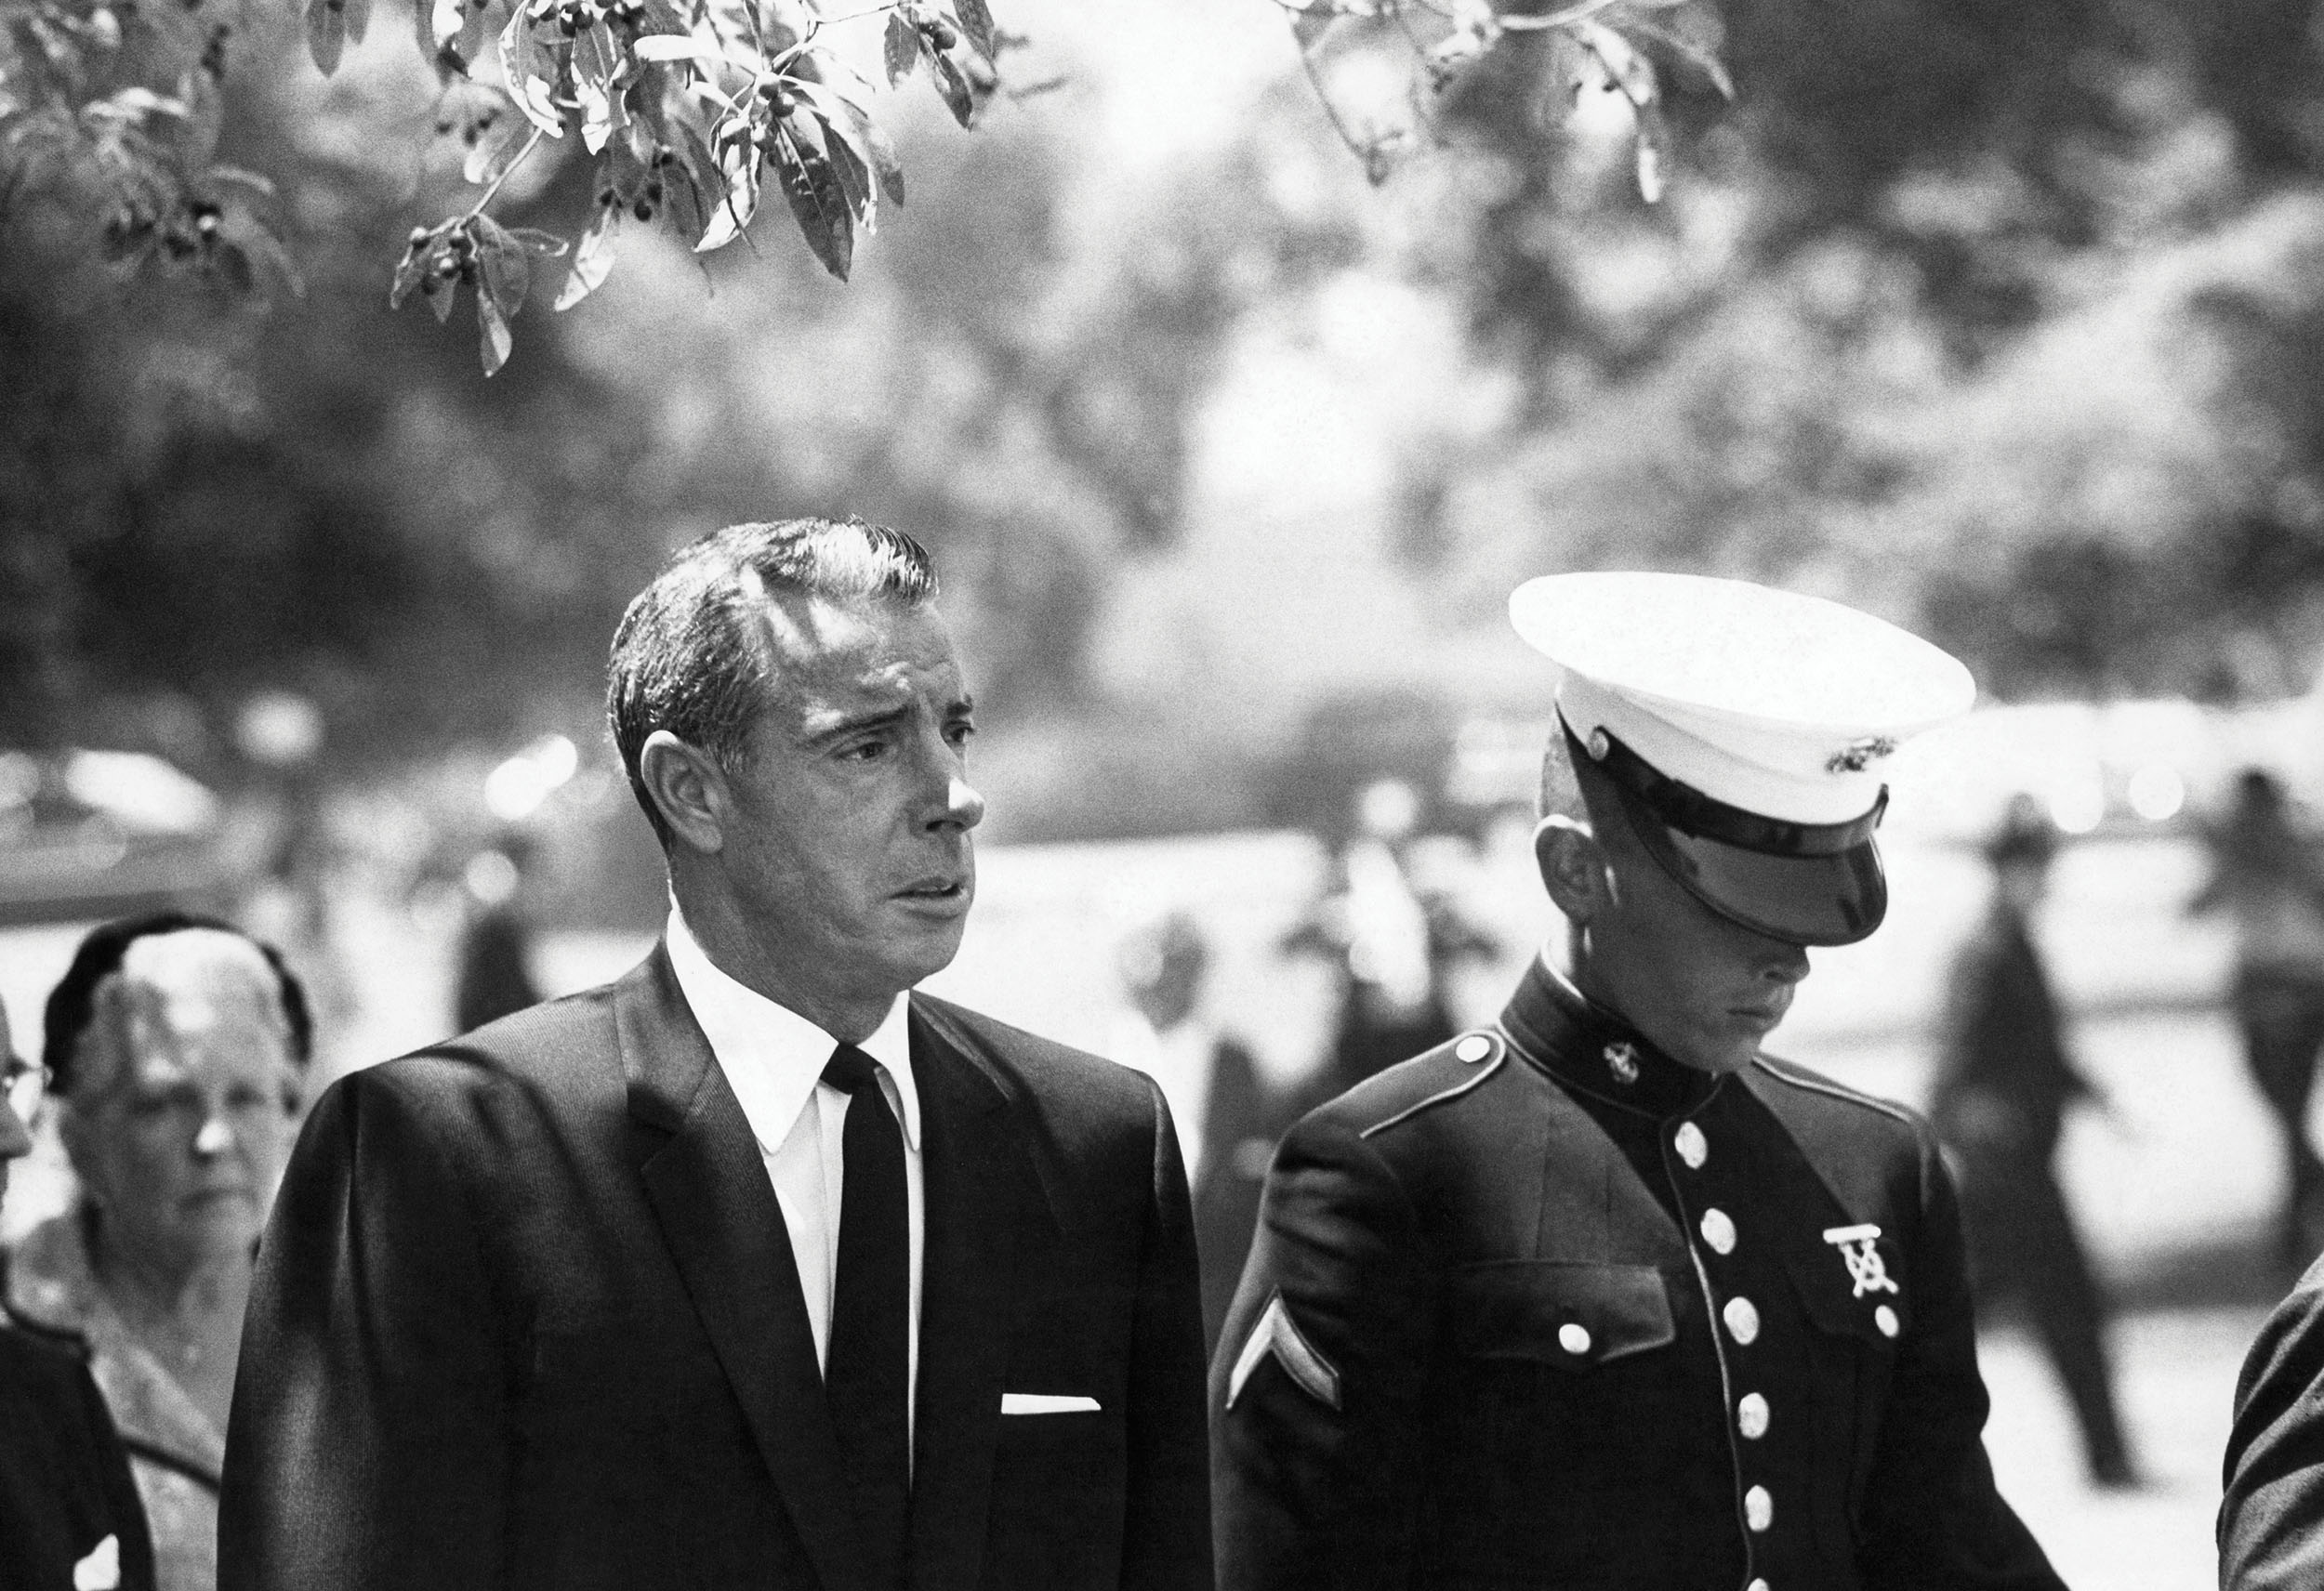 Monroe’s ex-husband, baseball legend Joe DiMaggio, with his son at her funeral, August 8, 1962